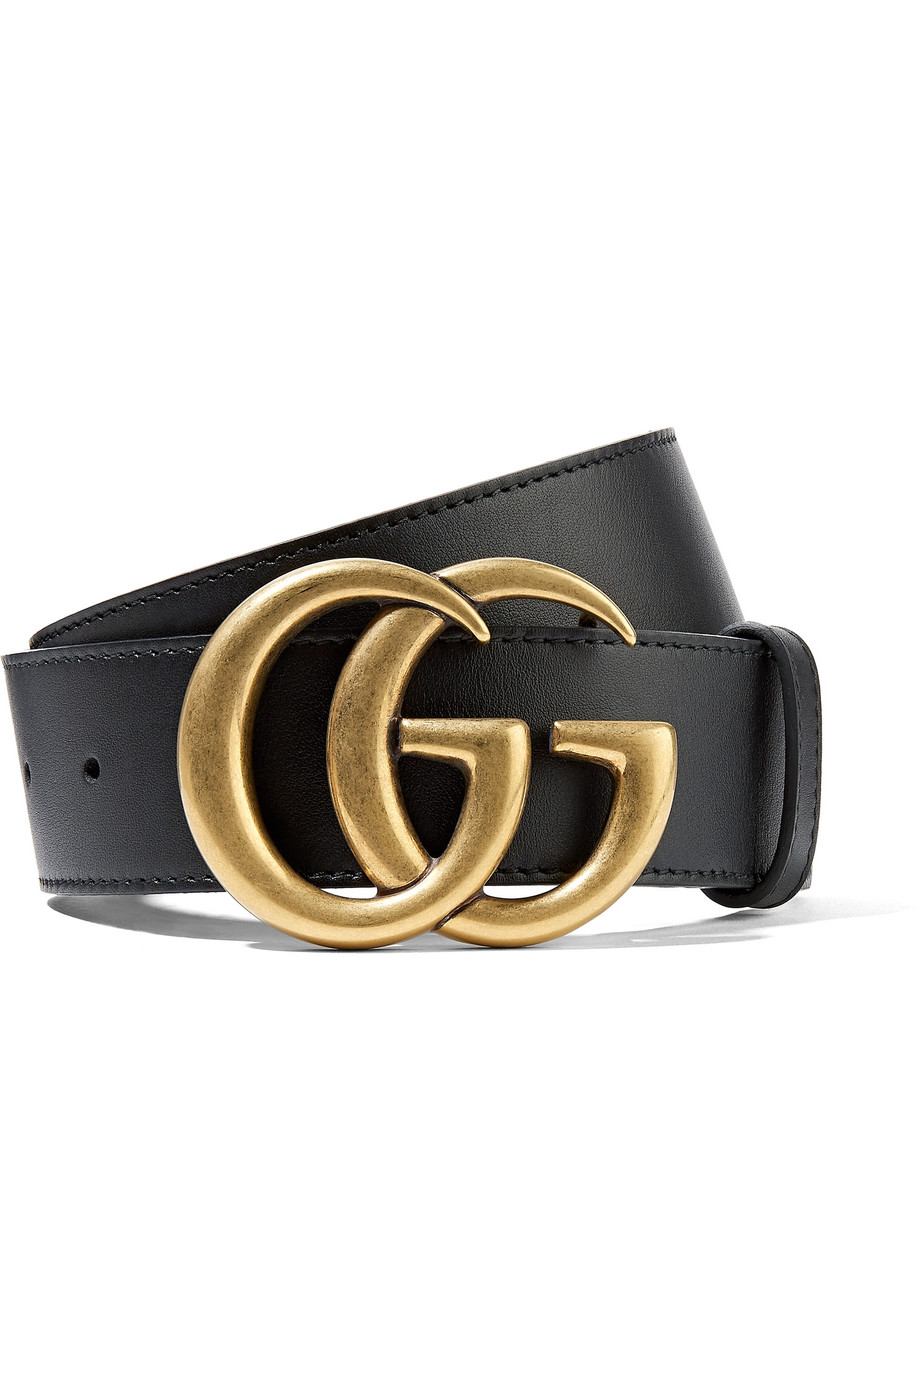 gucci womens belt with double g buckle